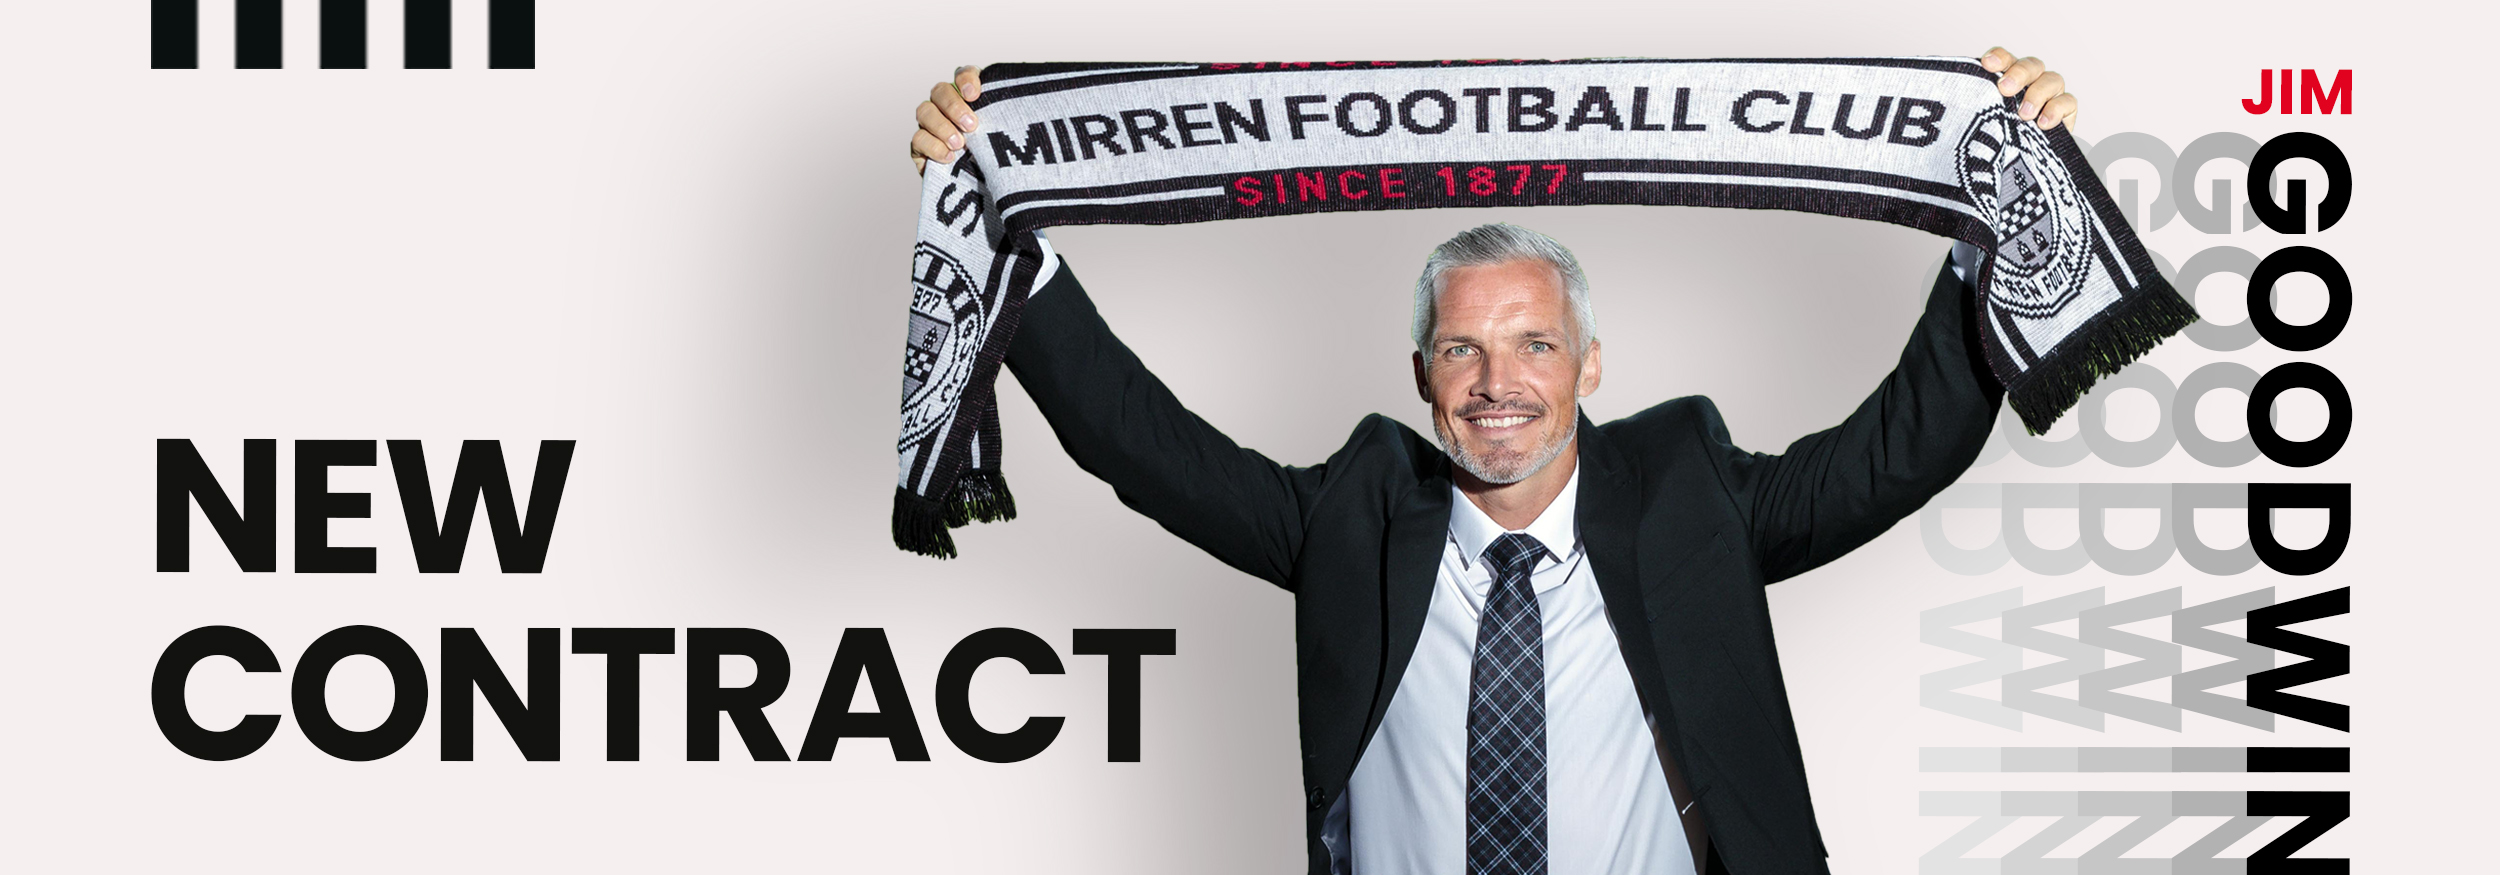 Delight as Jim Goodwin agrees new contract